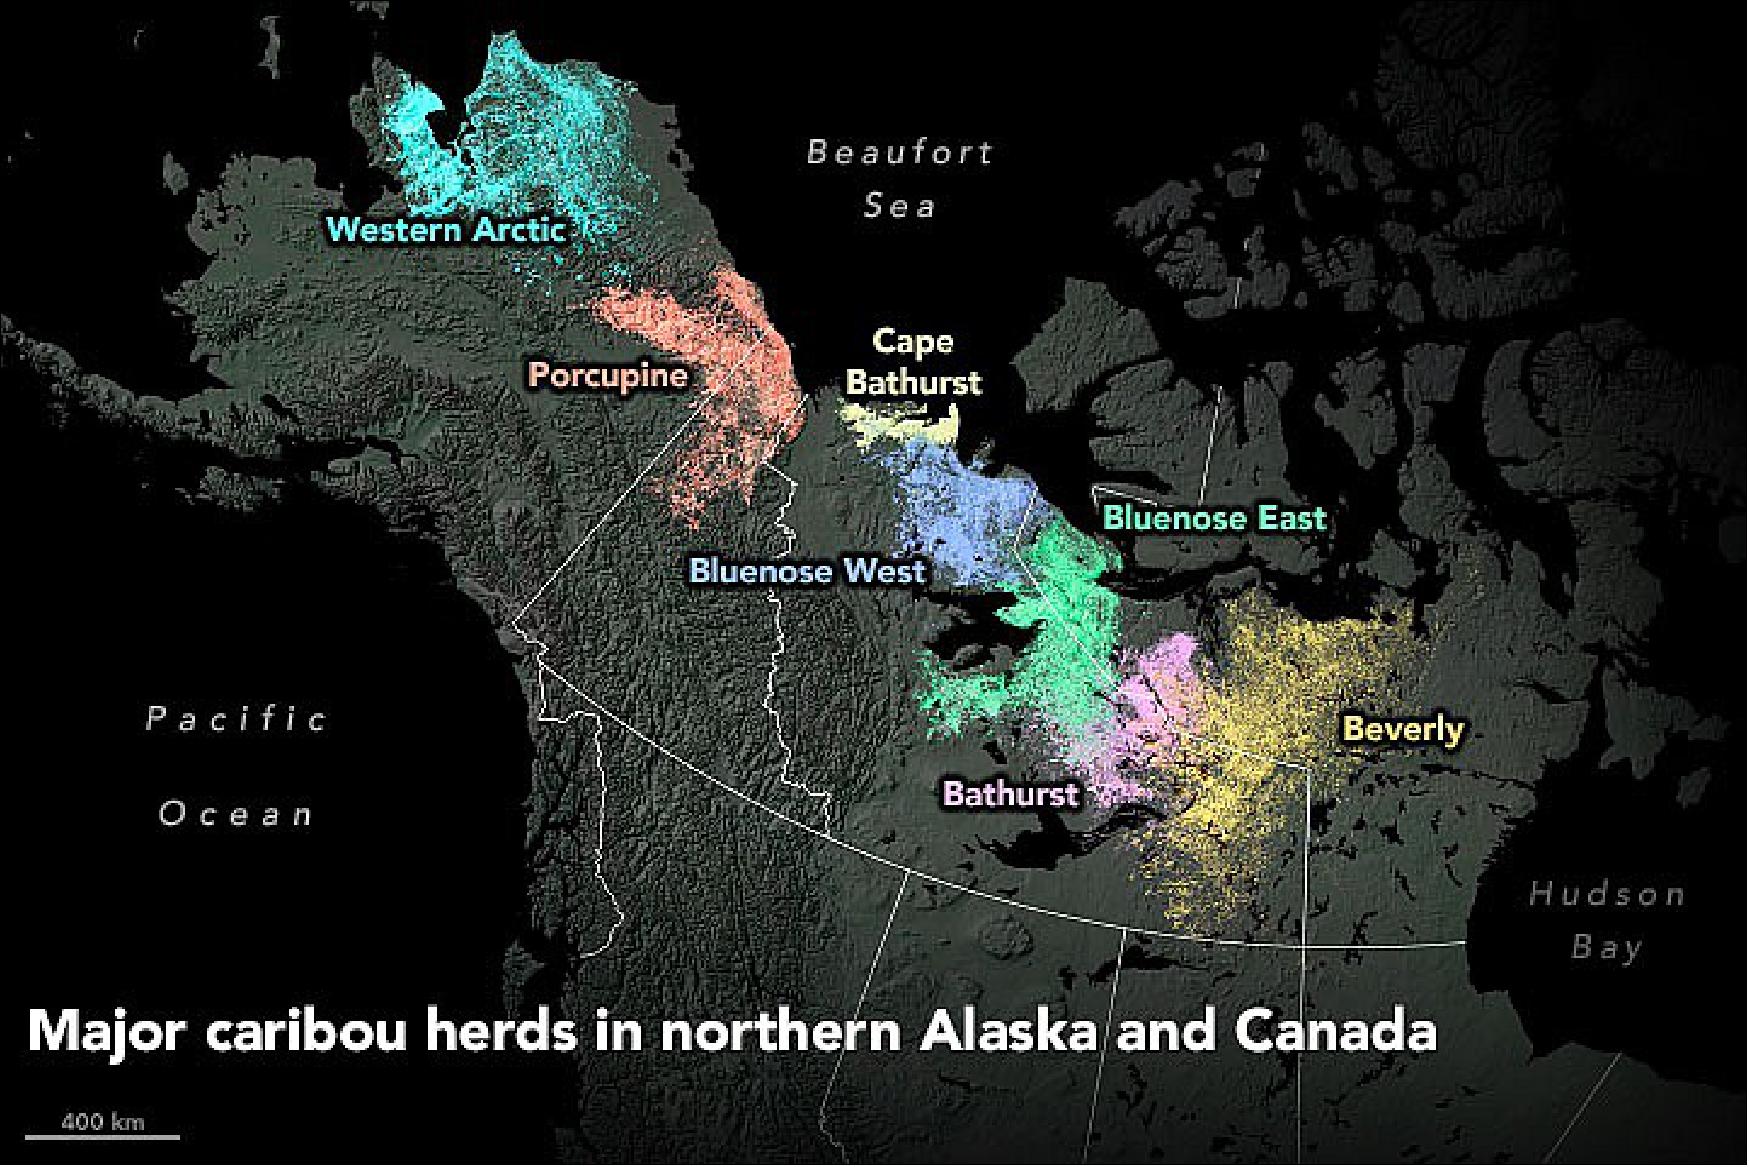 Figure 5: This map shows the range of seven major caribou herds in northern Alaska and Canada. These are barren-ground (migratory tundra) animals. This “ecotype” of caribou migrates hundreds of miles each spring, moving toward the continent’s northern coast, where they birth their young. In contrast, woodland caribou live throughout the boreal forests and mountain ranges of North America. They are less social and do not migrate. Herd migration remains mostly an “unexplained and unexplainable mystery.” (image credit: NASA Earth Observatory image by Joshua Stevens, using data from Gurarie, E., et al. (2019). Story by Kathryn Hansen)